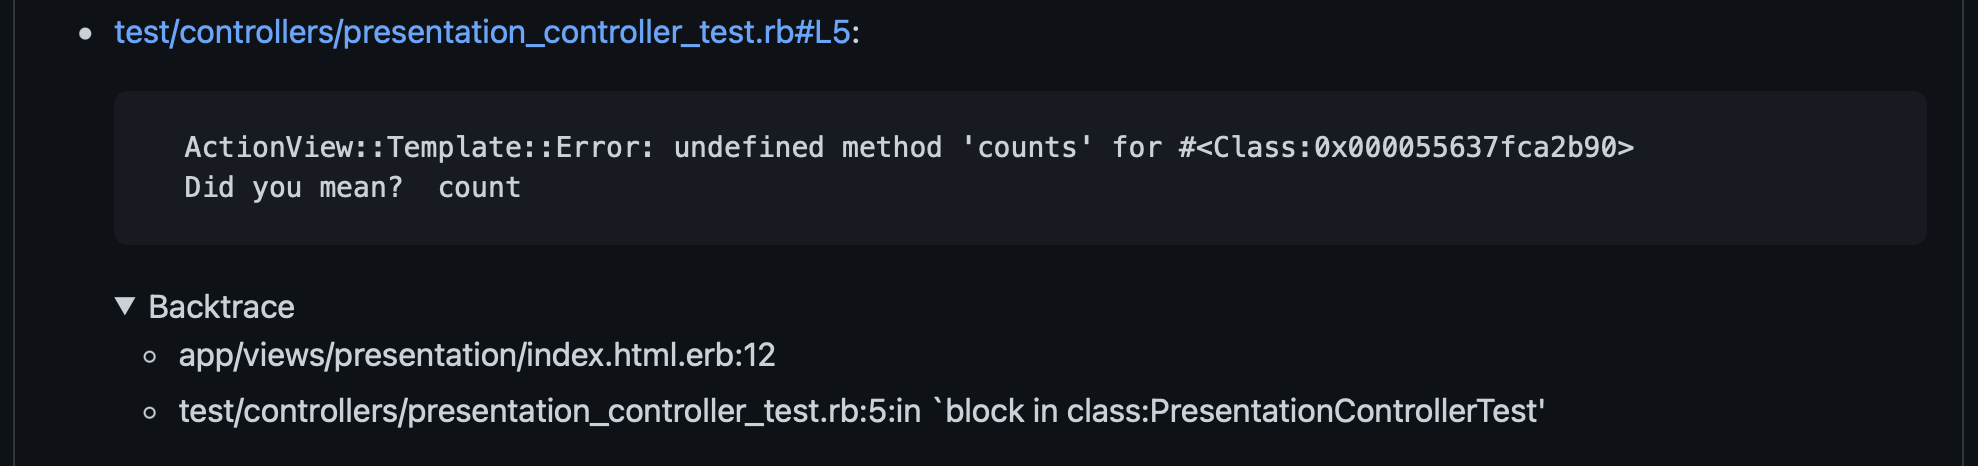 Screenshot of test backtrace included in comment on Github pull request.